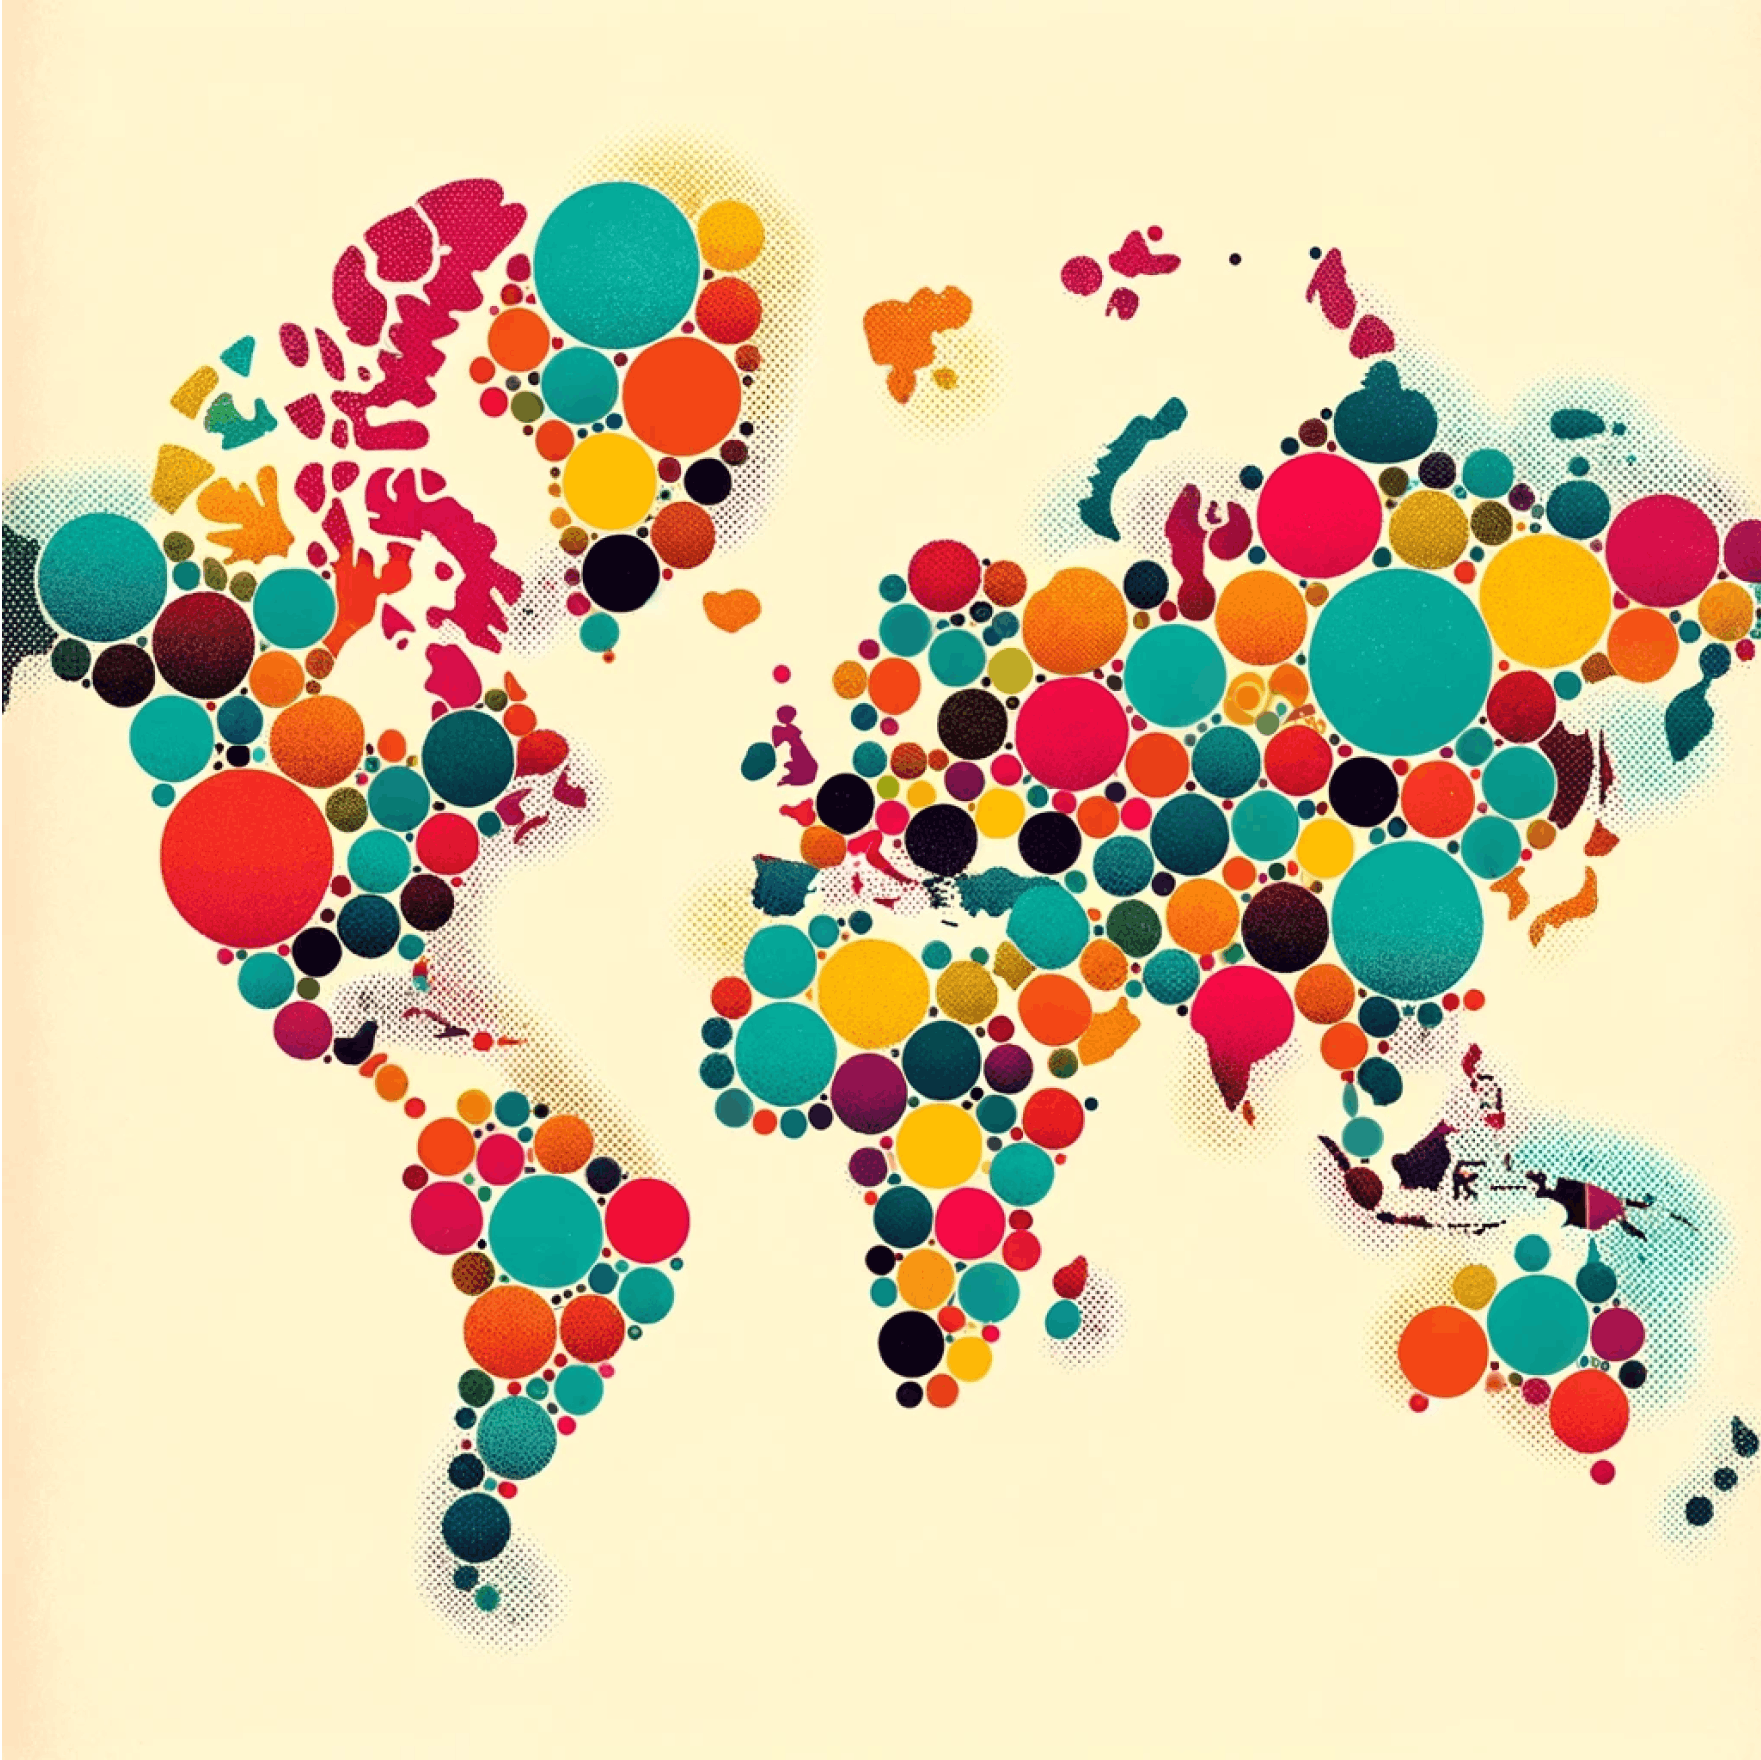 A collection of circles that outlines the map of the world.